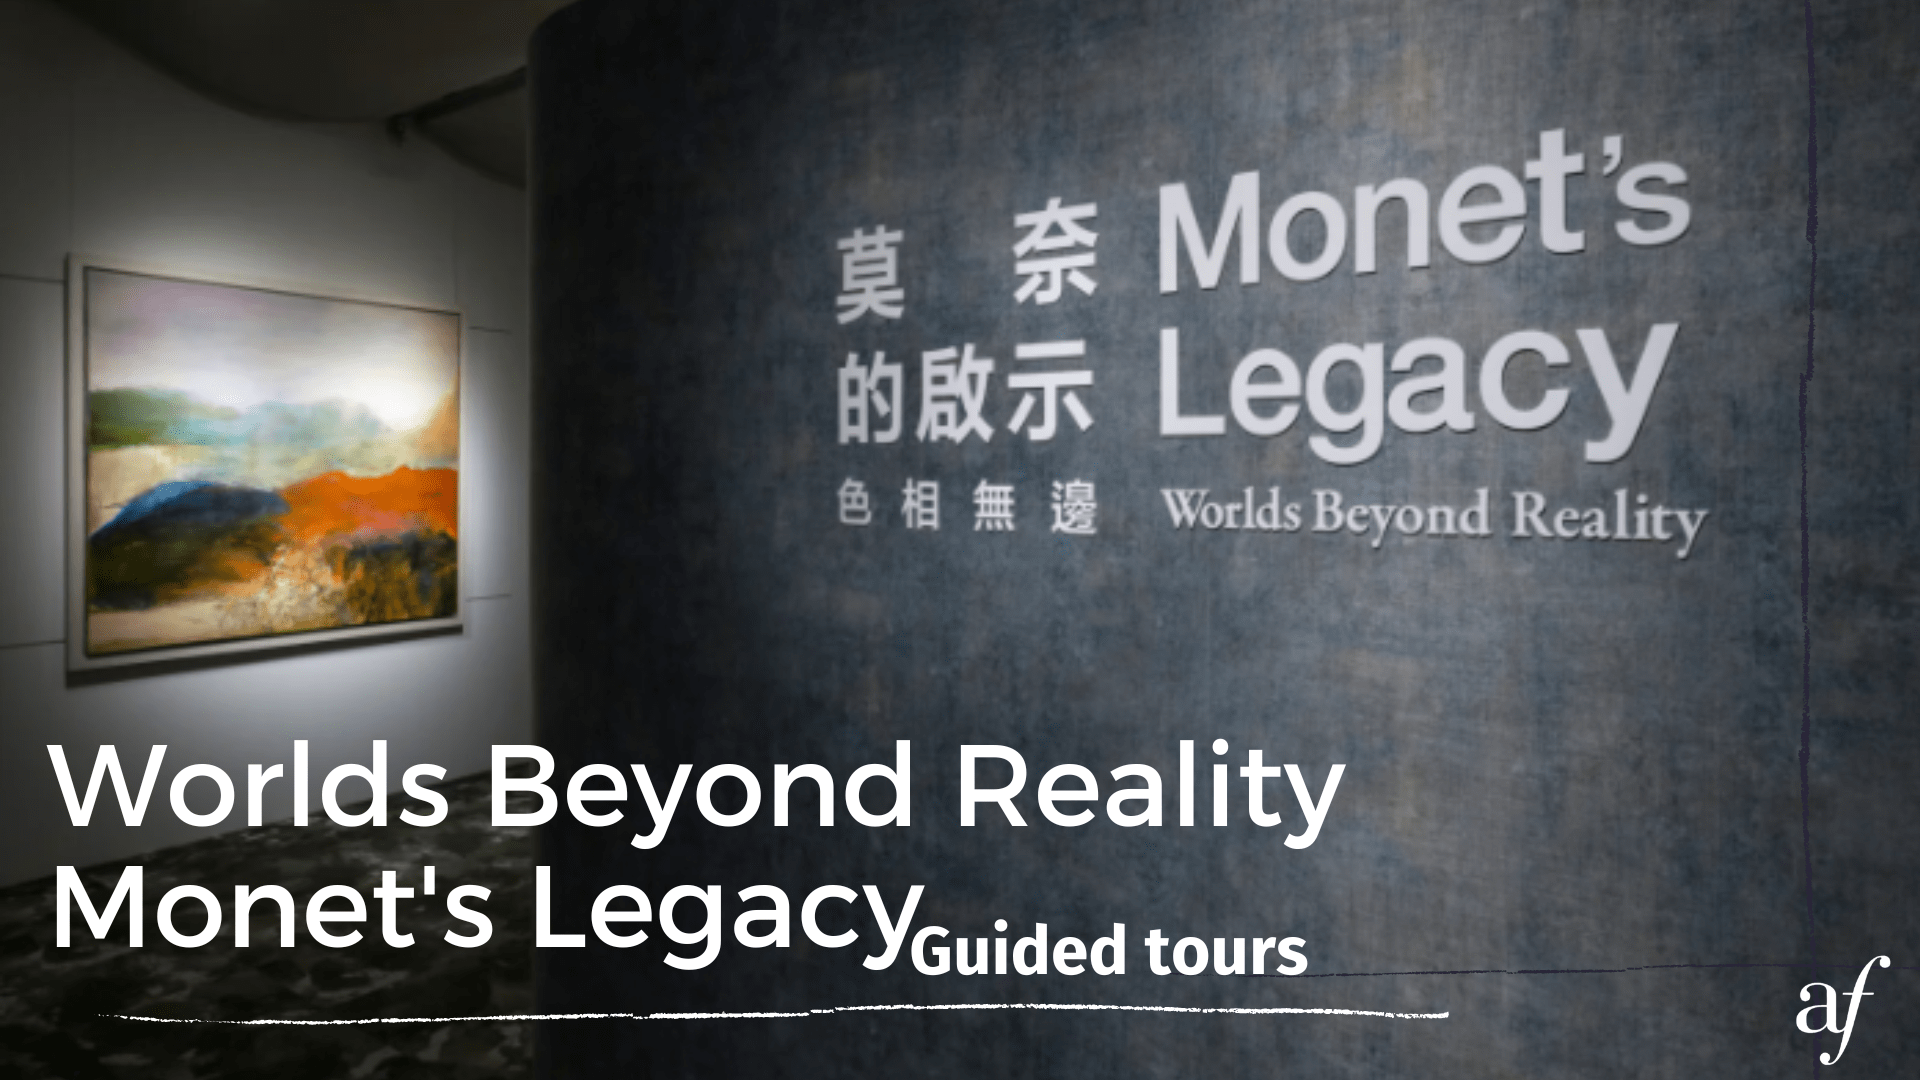 Worlds Beyond Reality - Monet's Legacy Guided tours